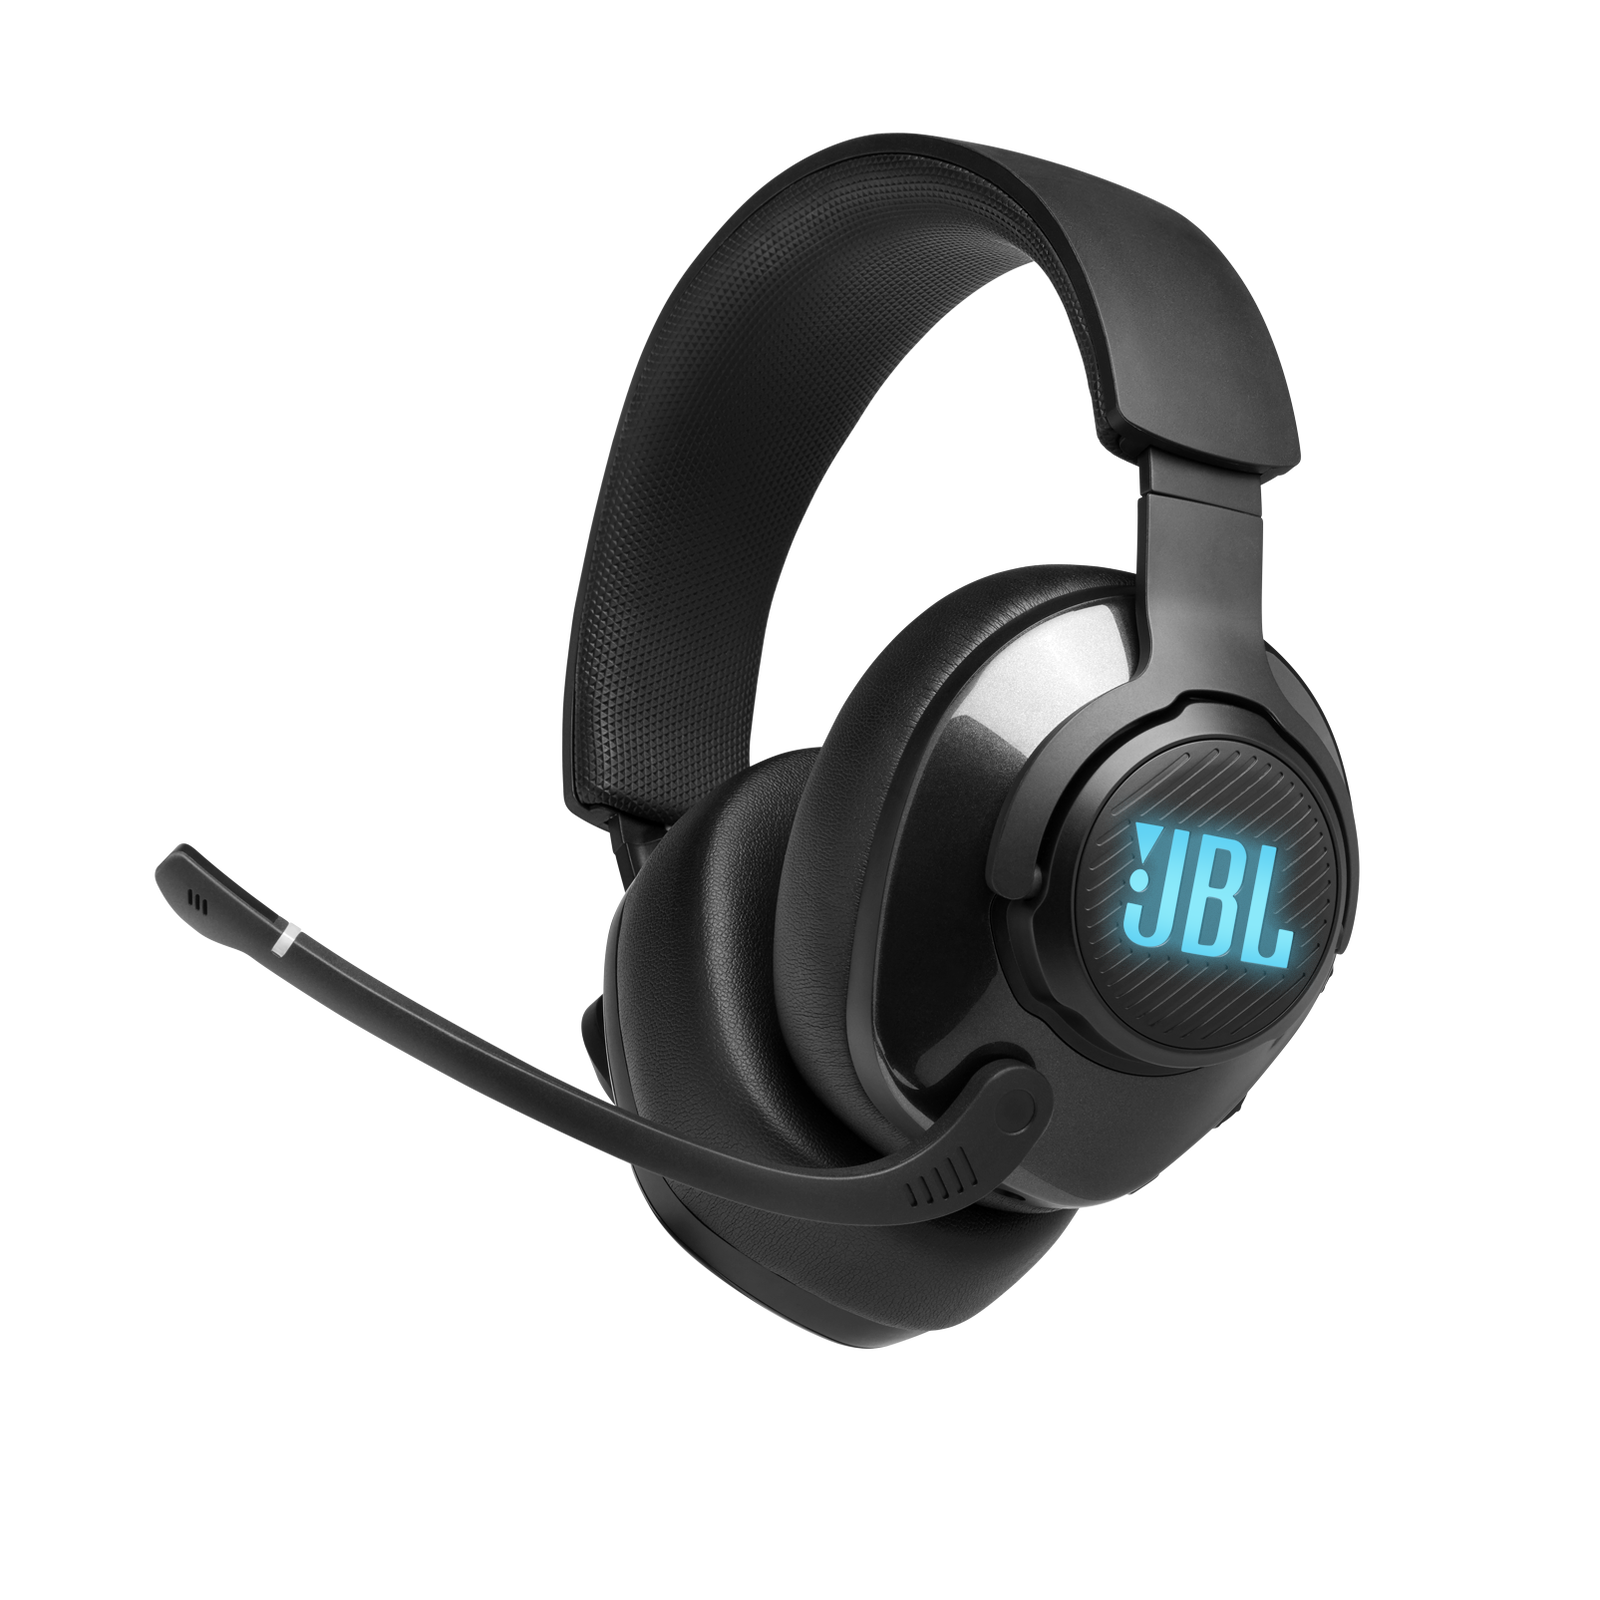 JBL JBL Quantum 400 | Over-Ear Wired Gaming Headset - JBL 7.1 Surround Sound & Mic Noise Cancelling - PS4/XBOX/Switch/pc Compatible Gaming Headset REFURBISHED